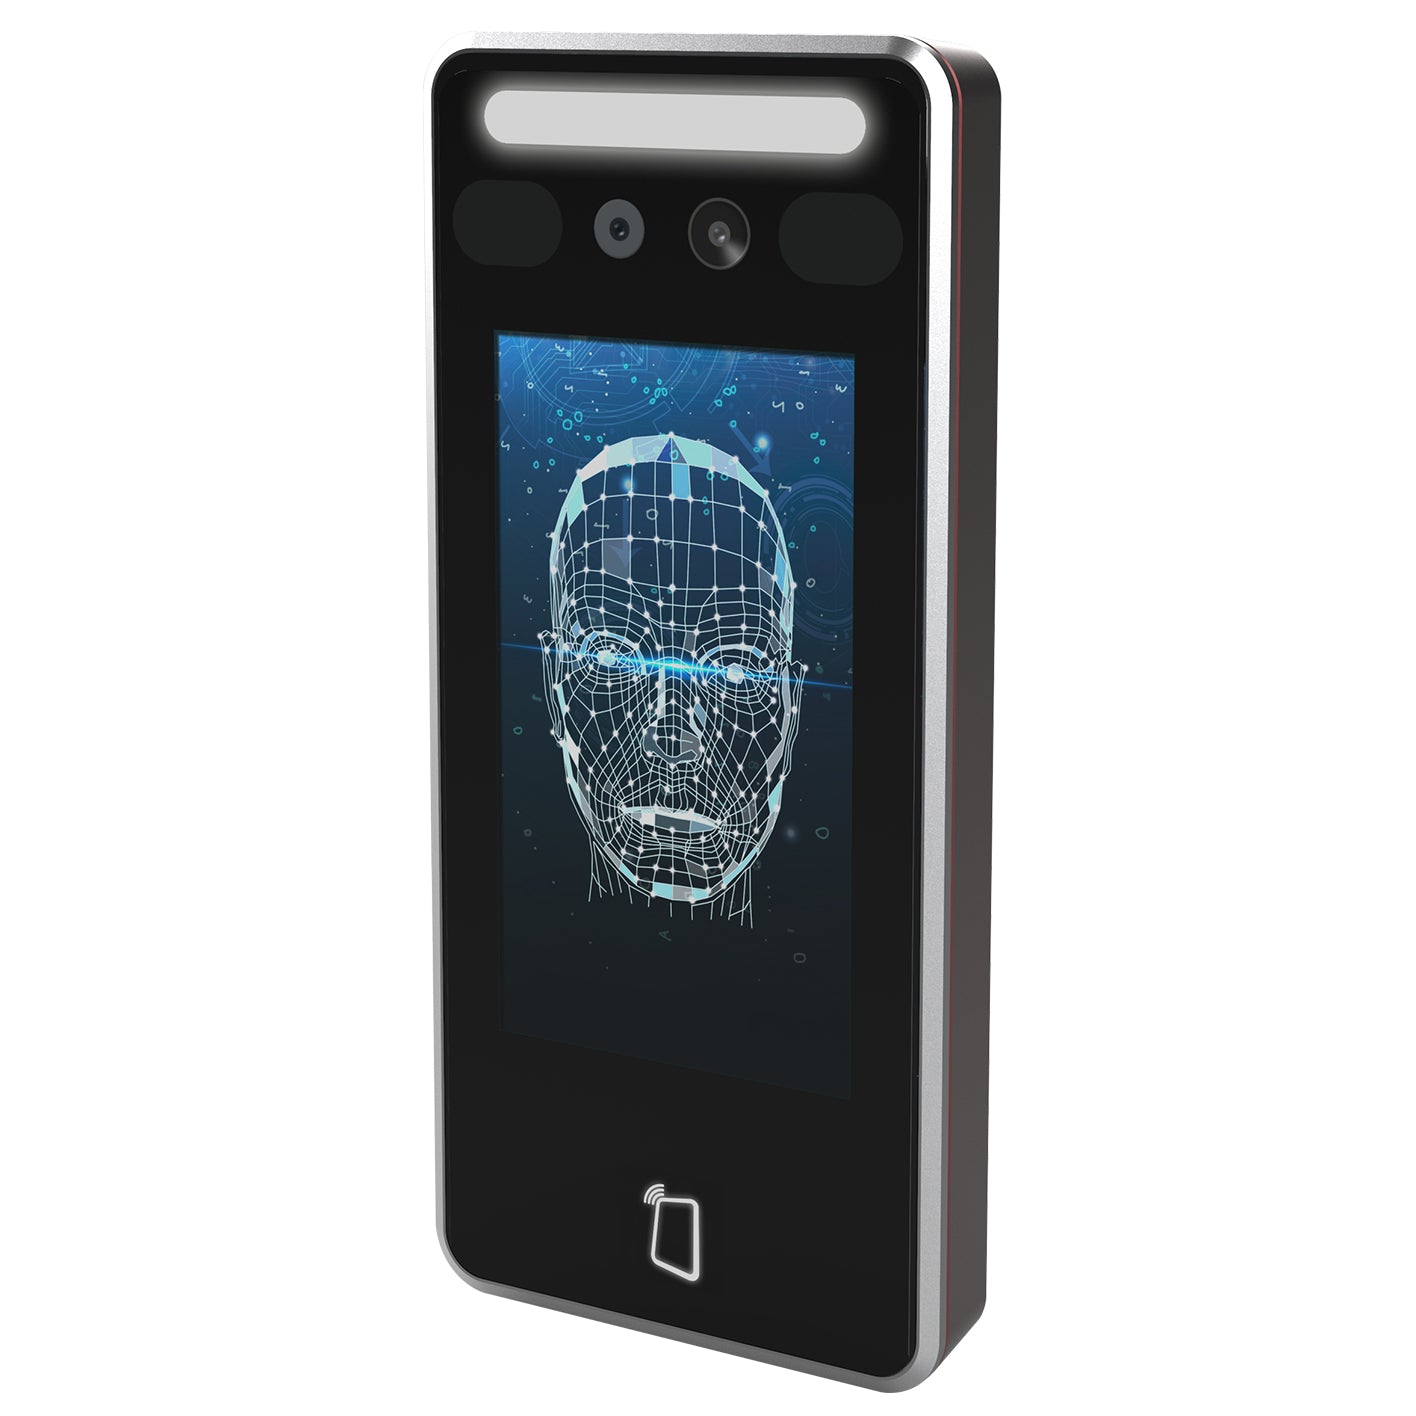 5-inch Standalone Dynamic Touchscreen Face Recognition